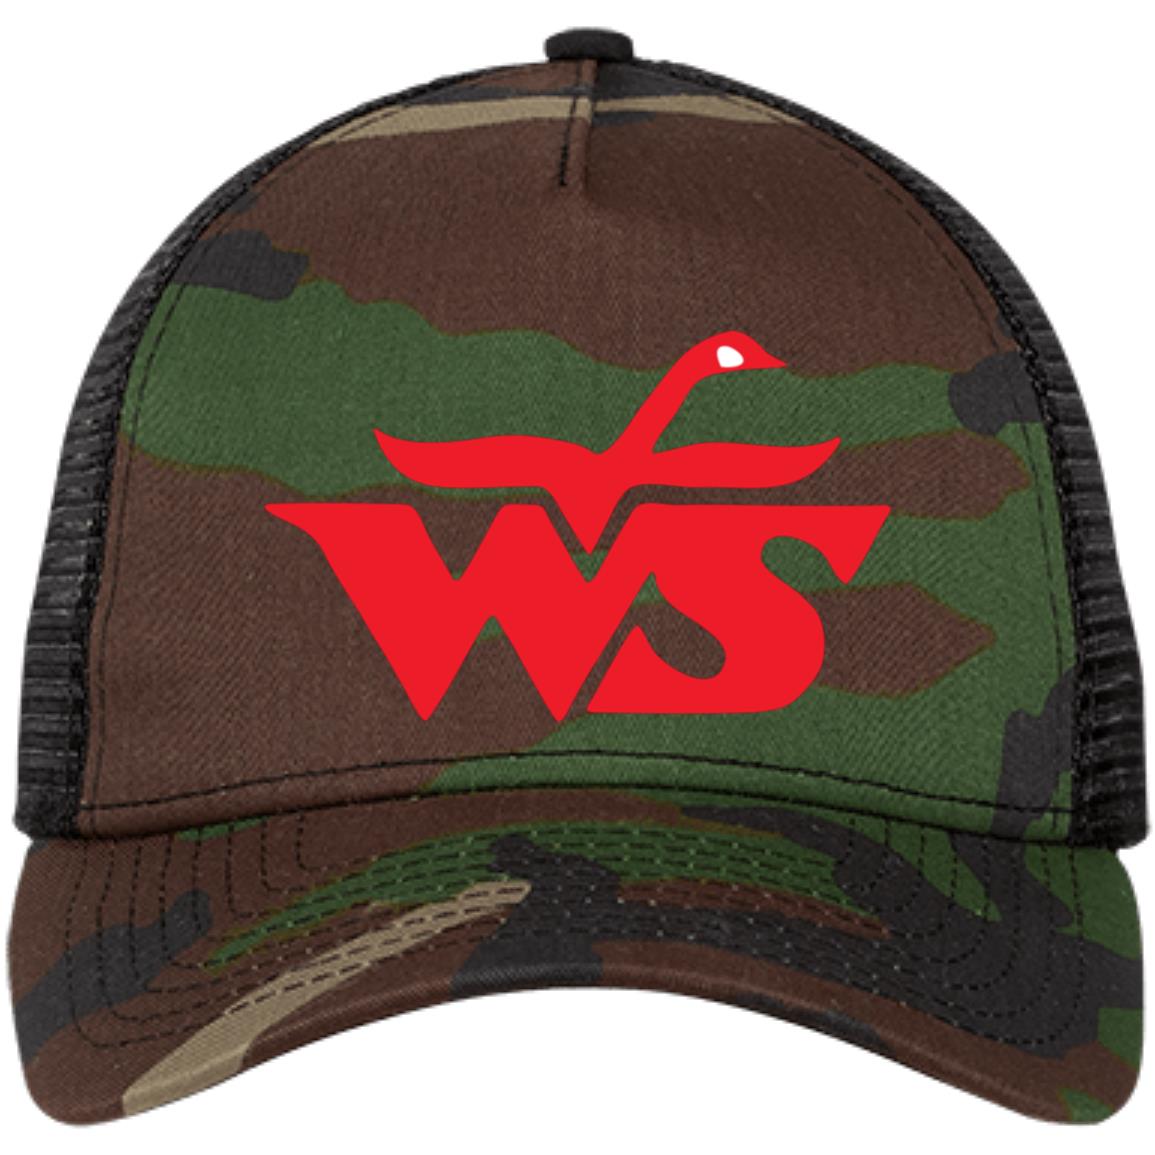 Wisconsin Southern Embroidered Snapback Trucker Cap